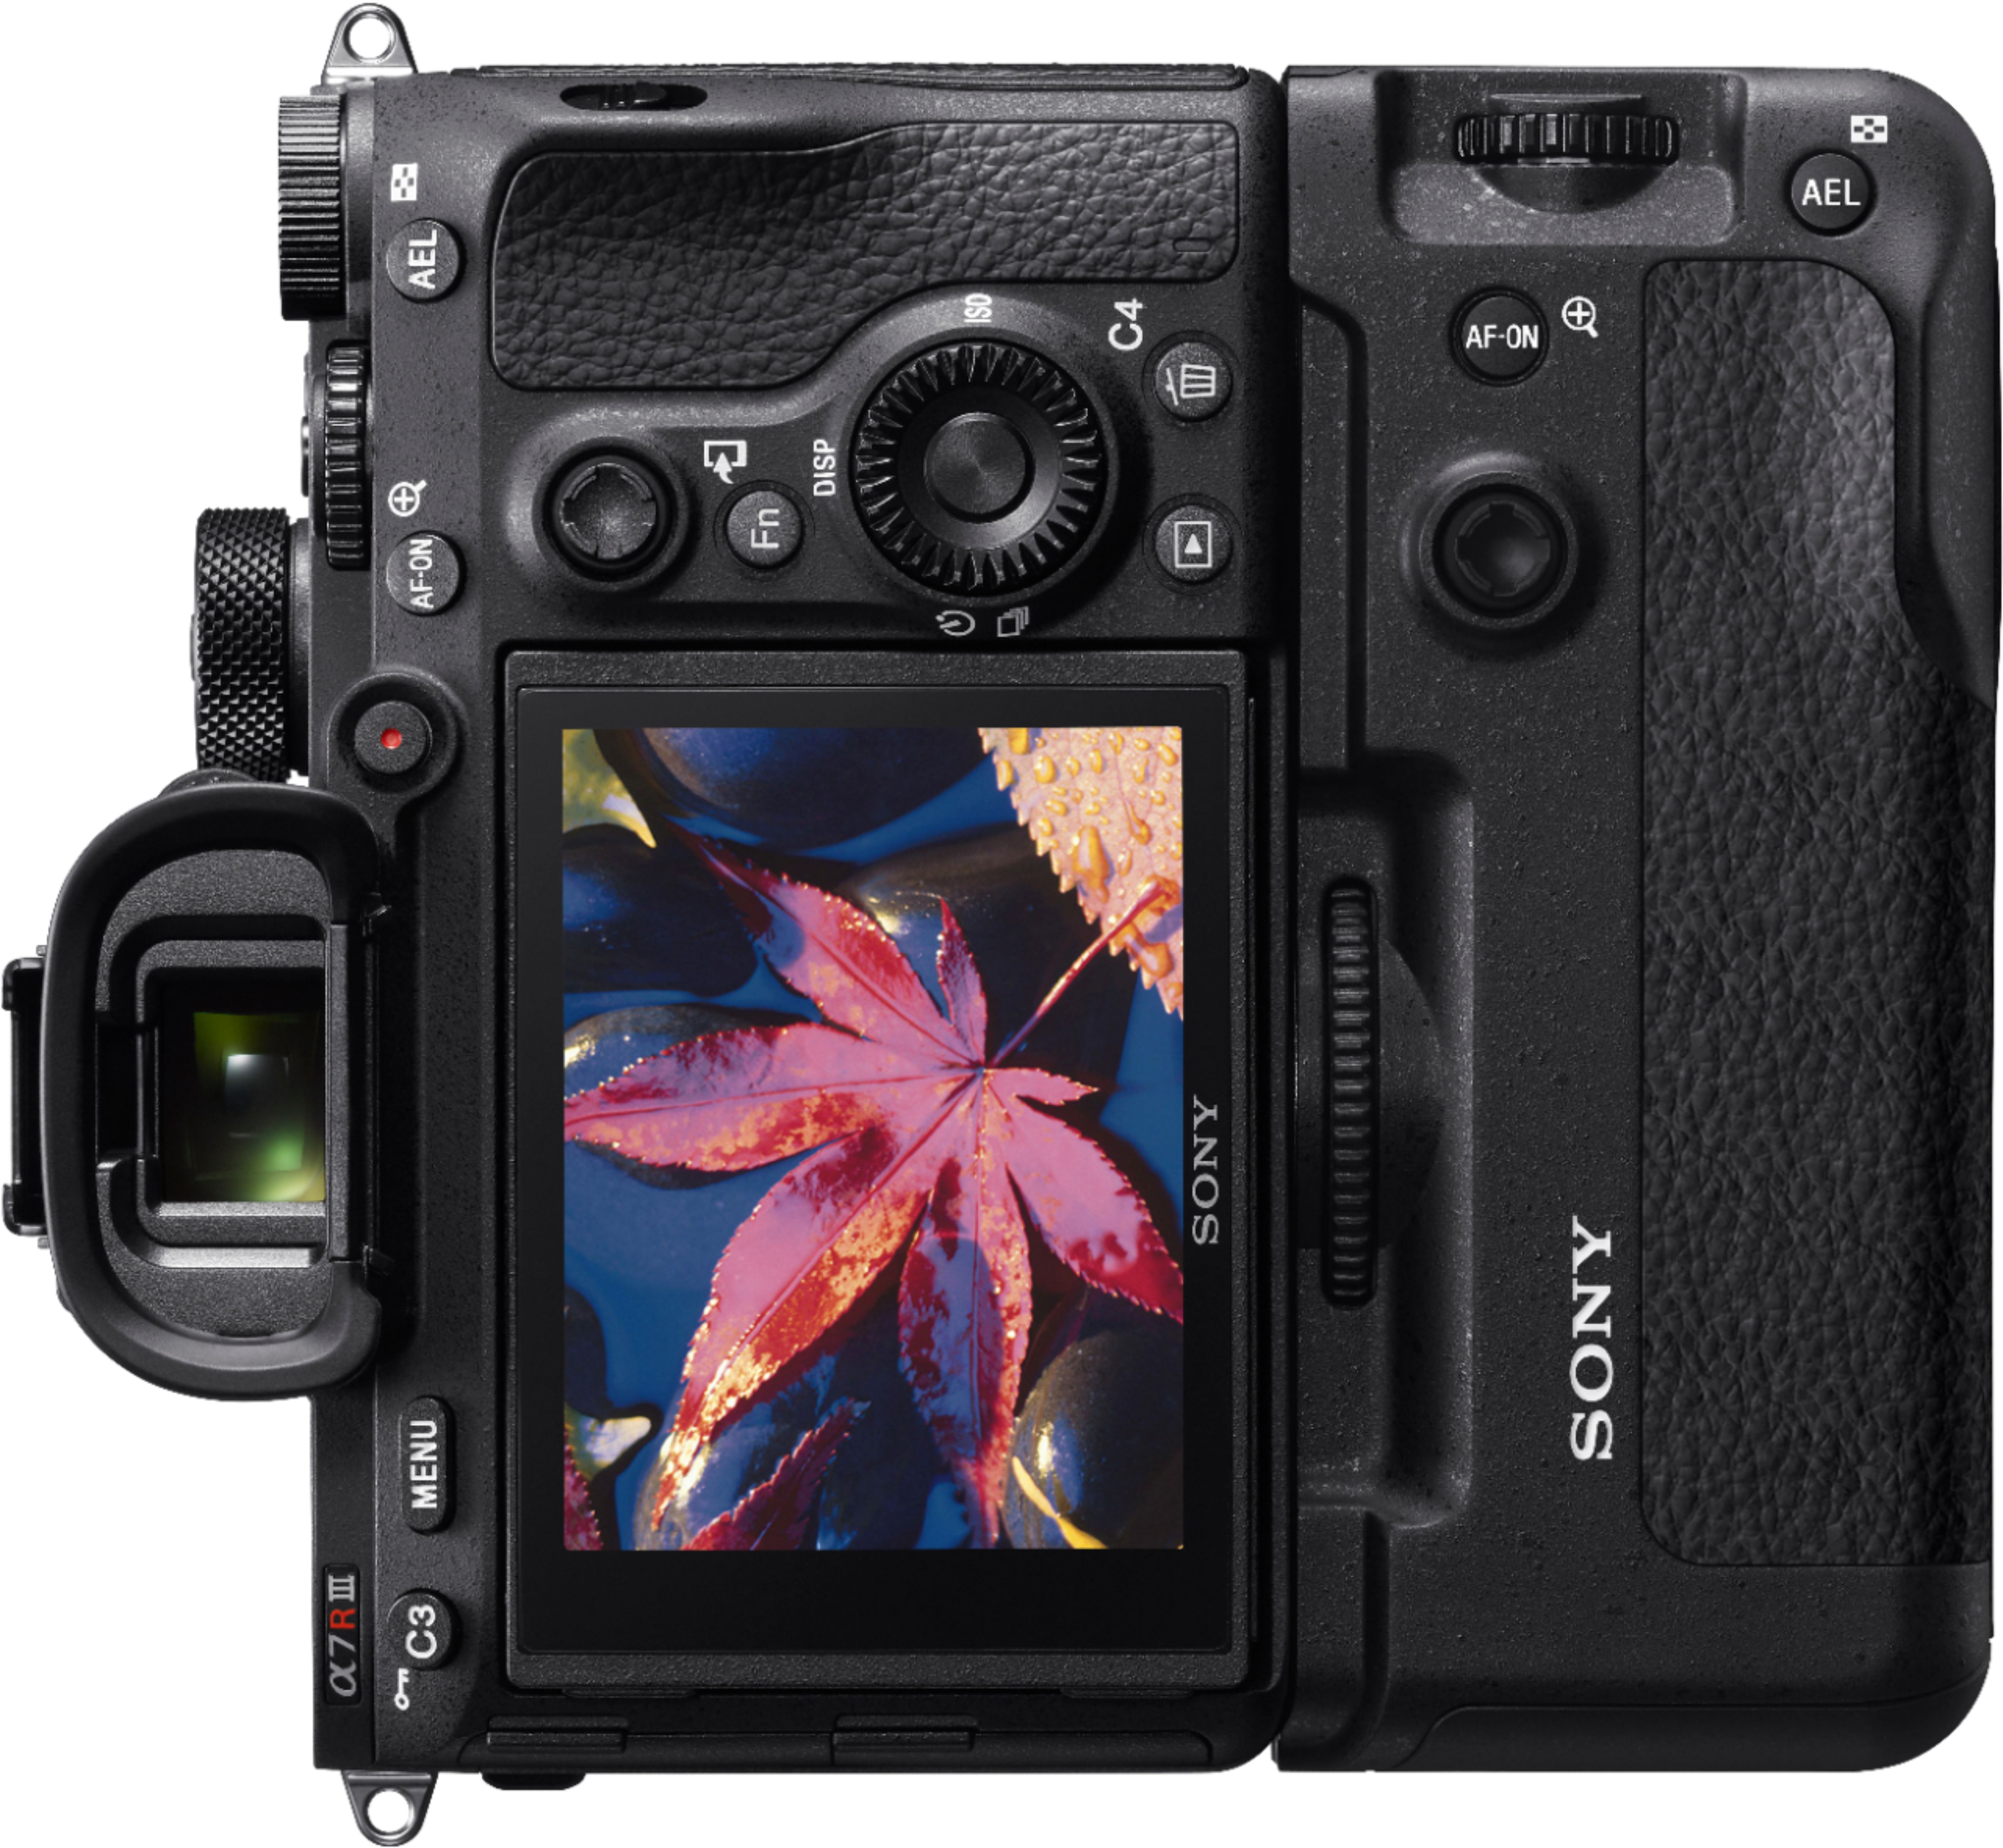 Sony Alpha a7 II Full-Frame Mirrorless Video Camera (Body Only) Black  ILCE7M2/B - Best Buy